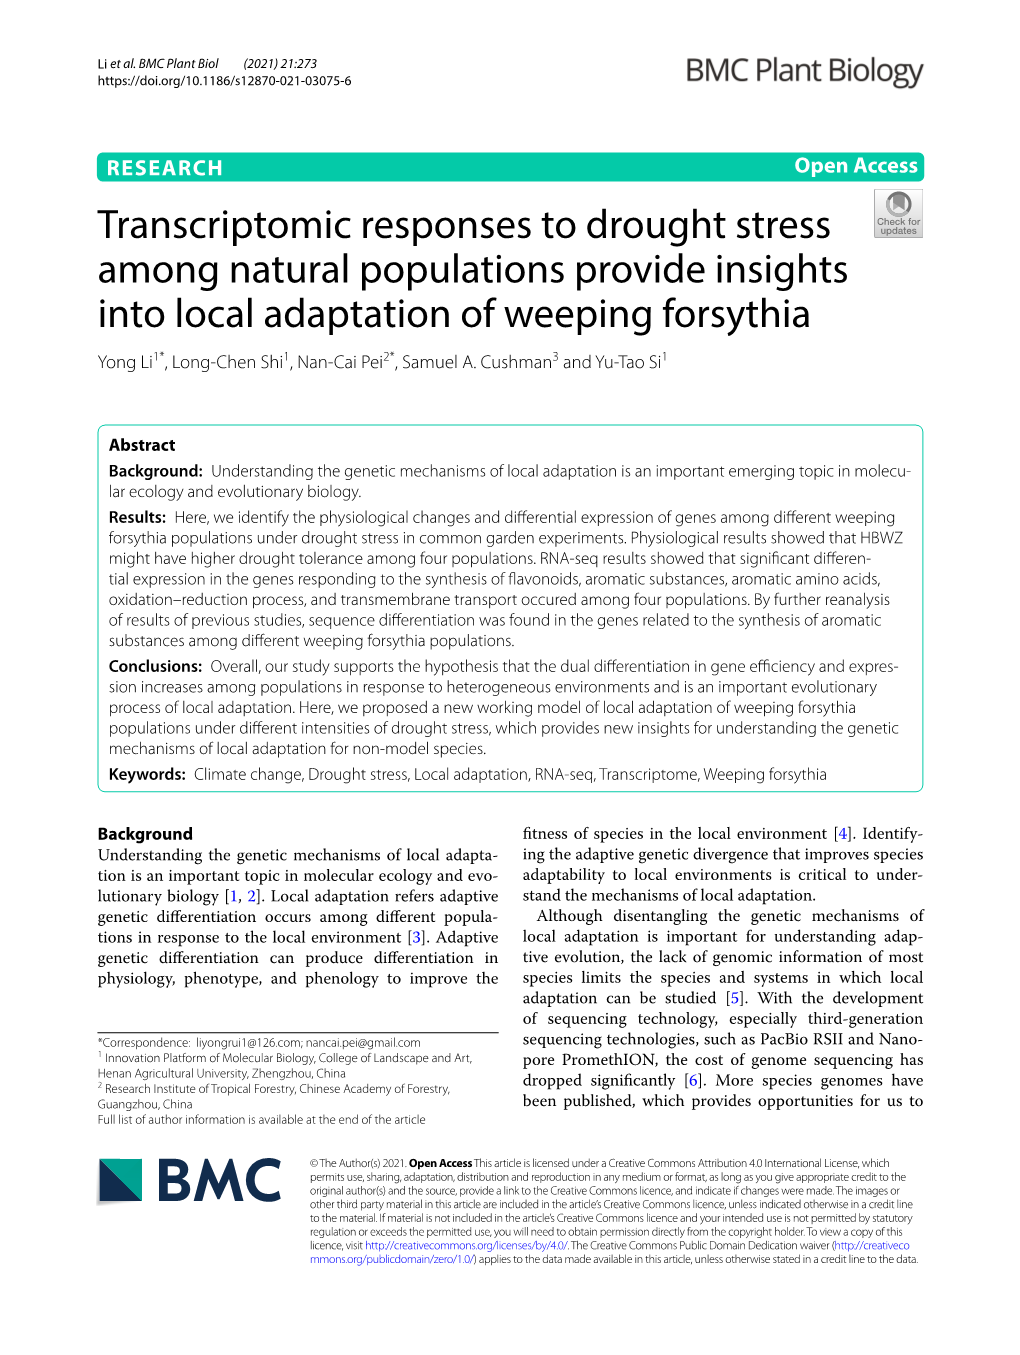 Transcriptomic Responses to Drought Stress Among Natural Populations